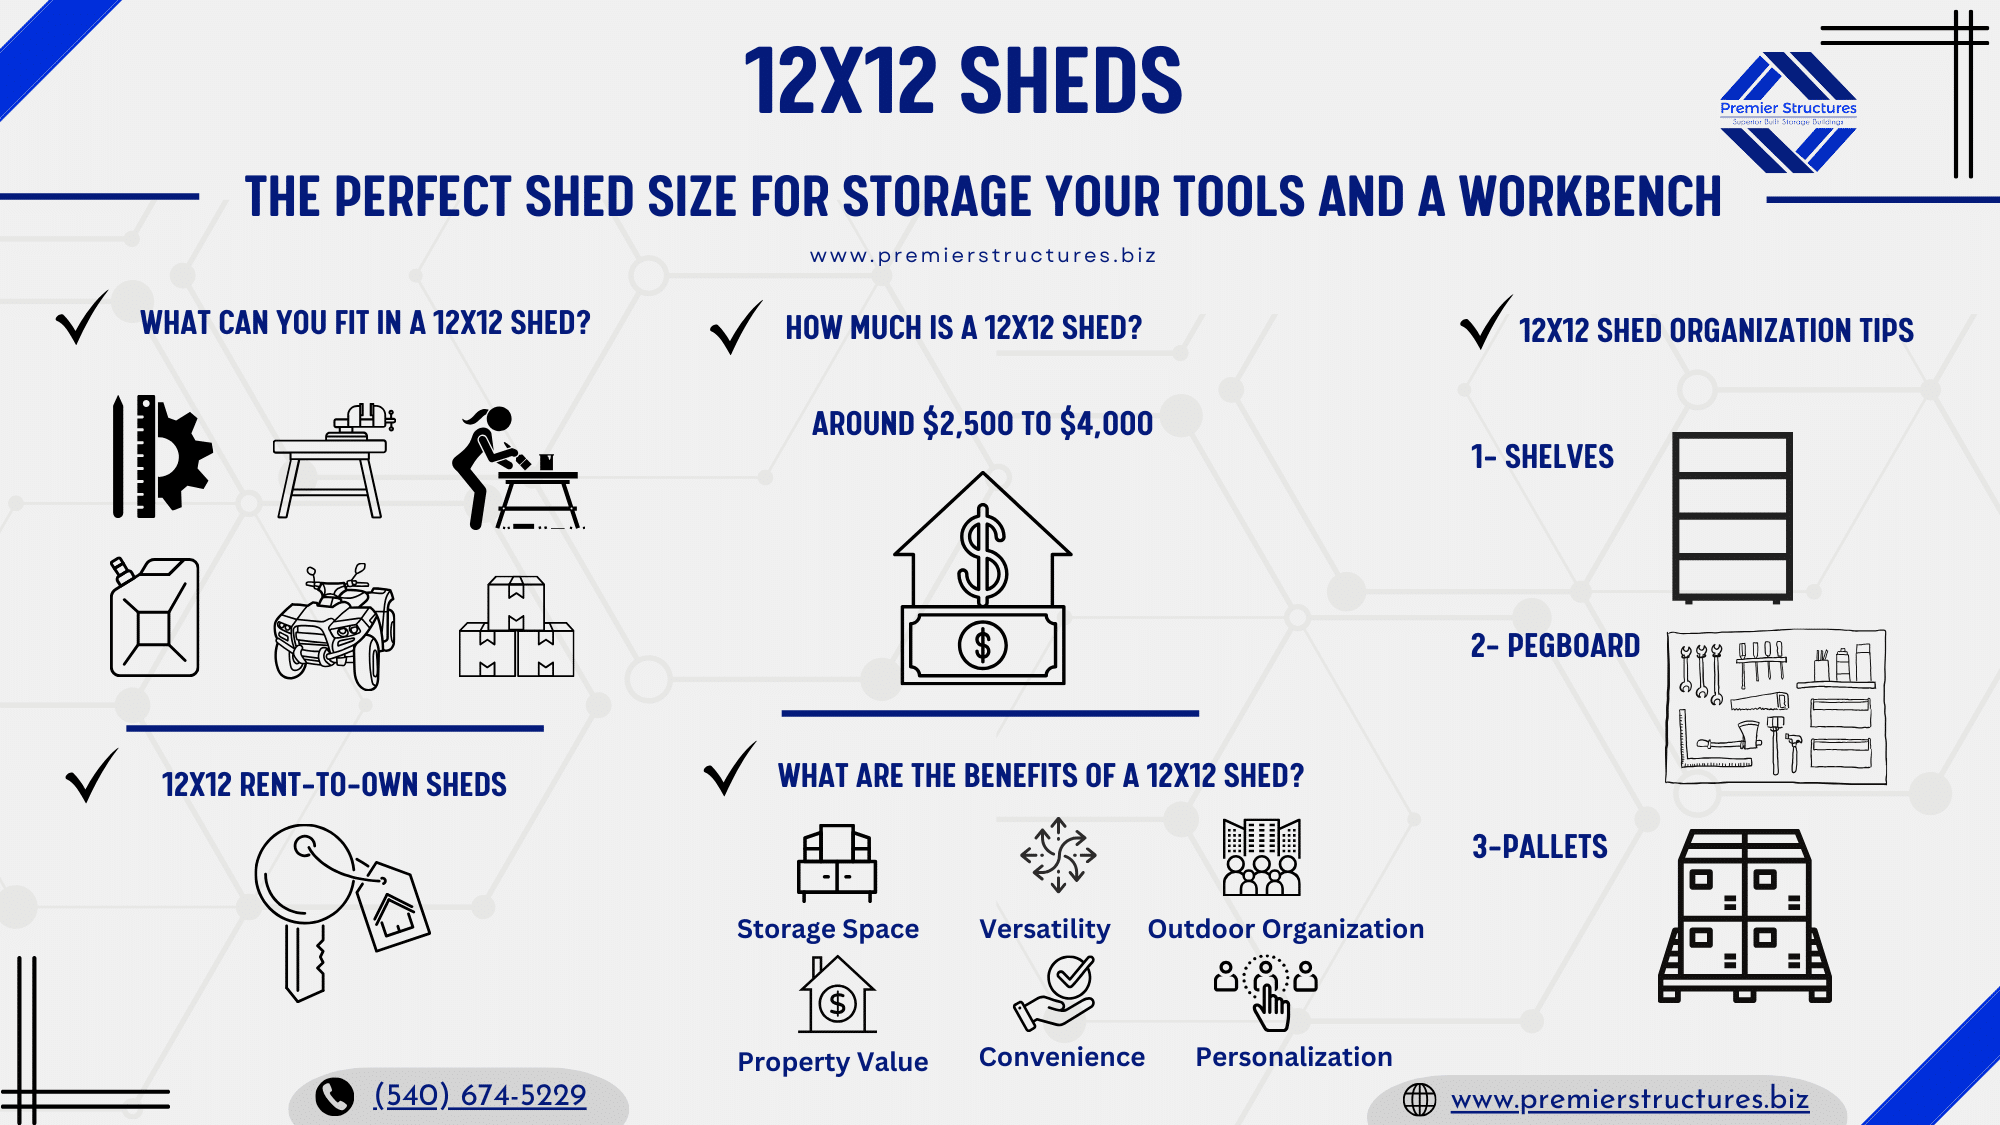 what can you fit in a 12x12 storage shed?